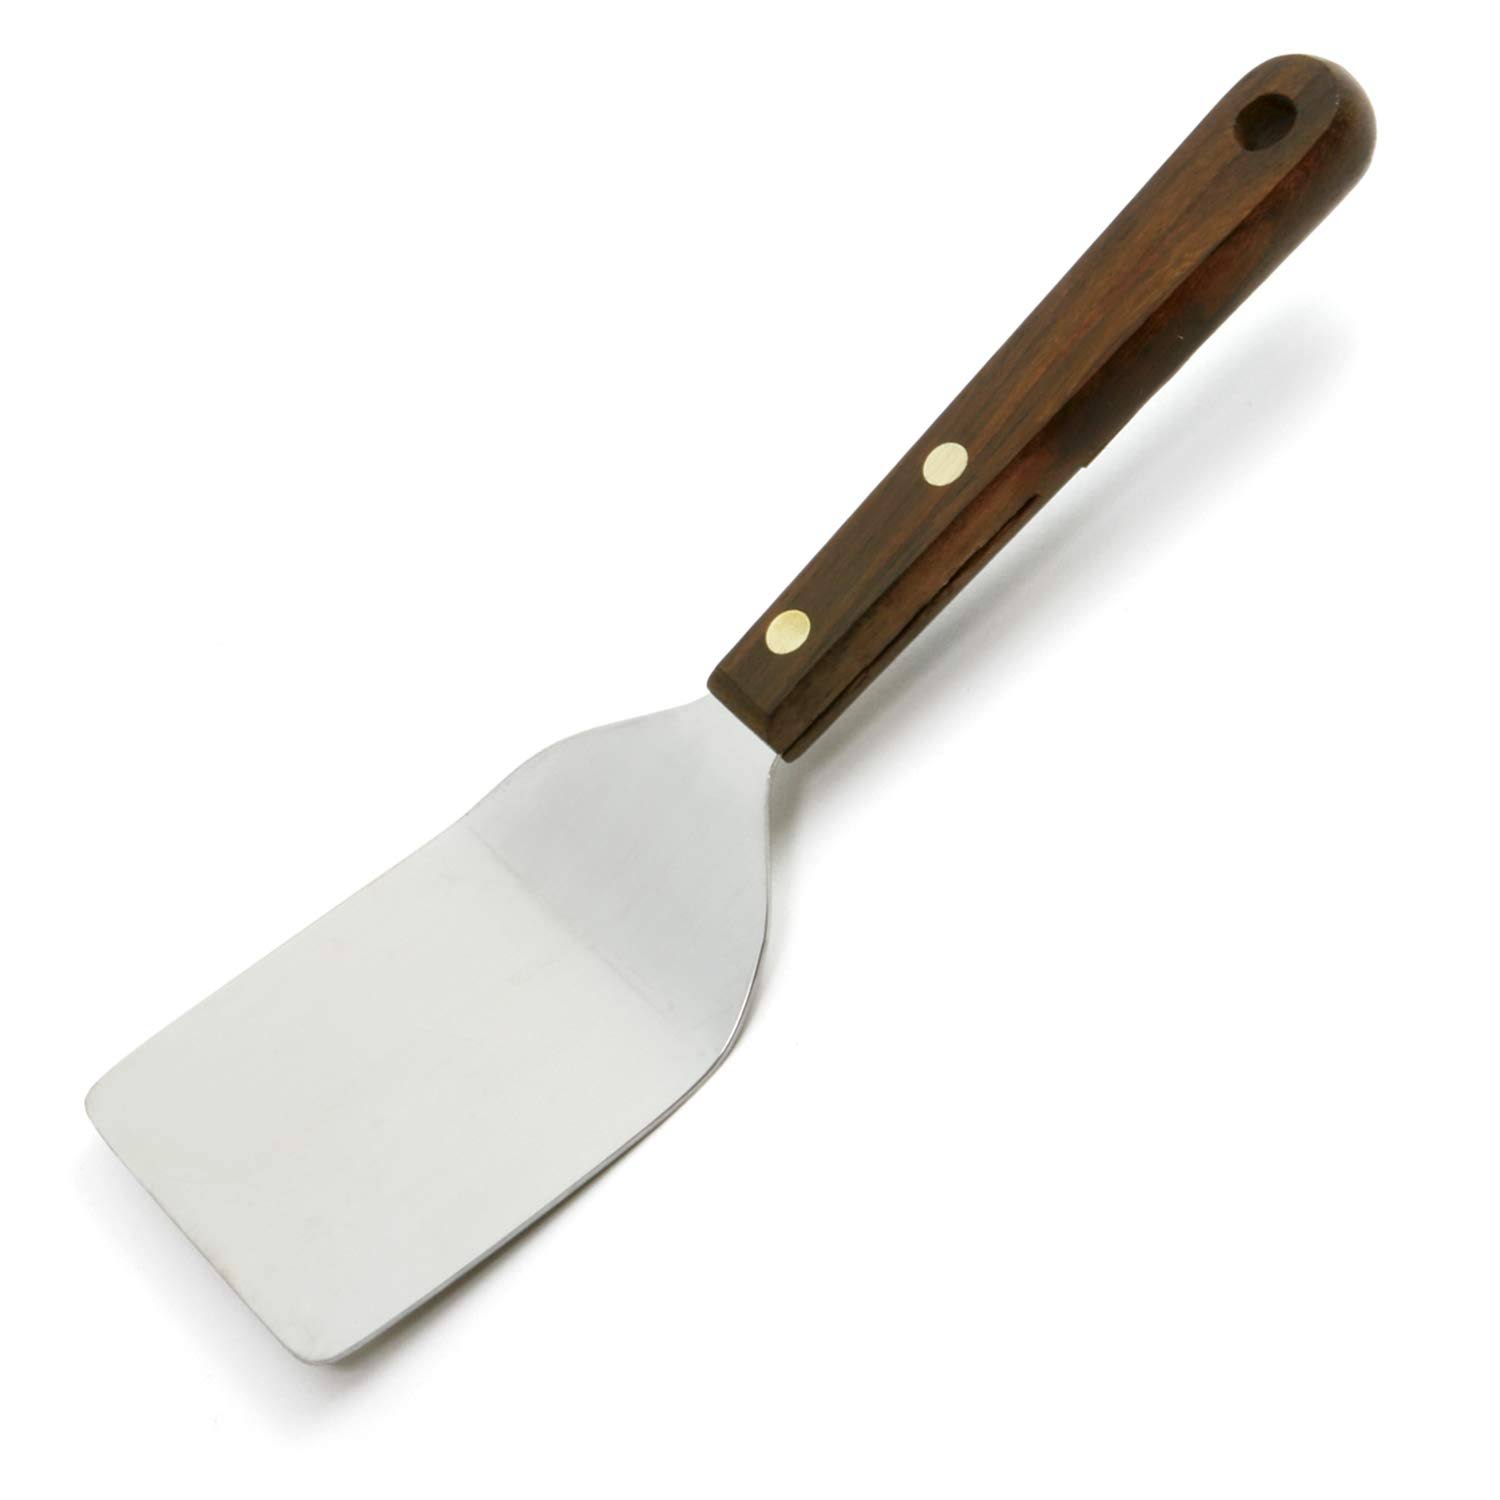 Norpro 1167 Stainless Steel Wide Head Spatula - with Wood Handle, 7.5"